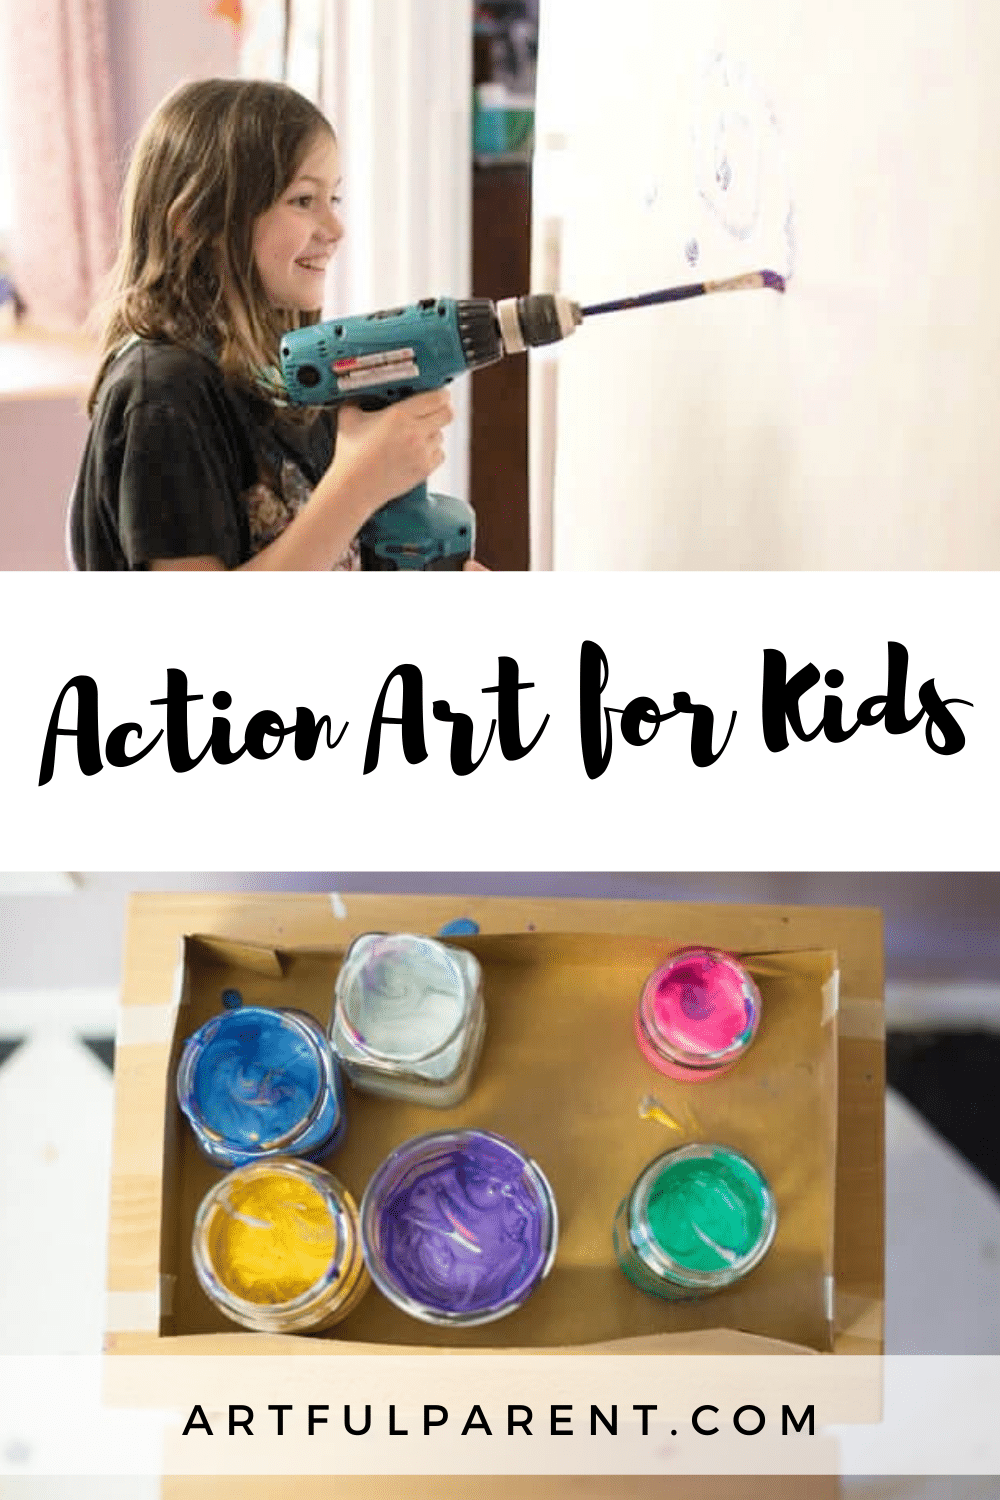 Action Art for Kids: Try Painting with a Drill & Brush!